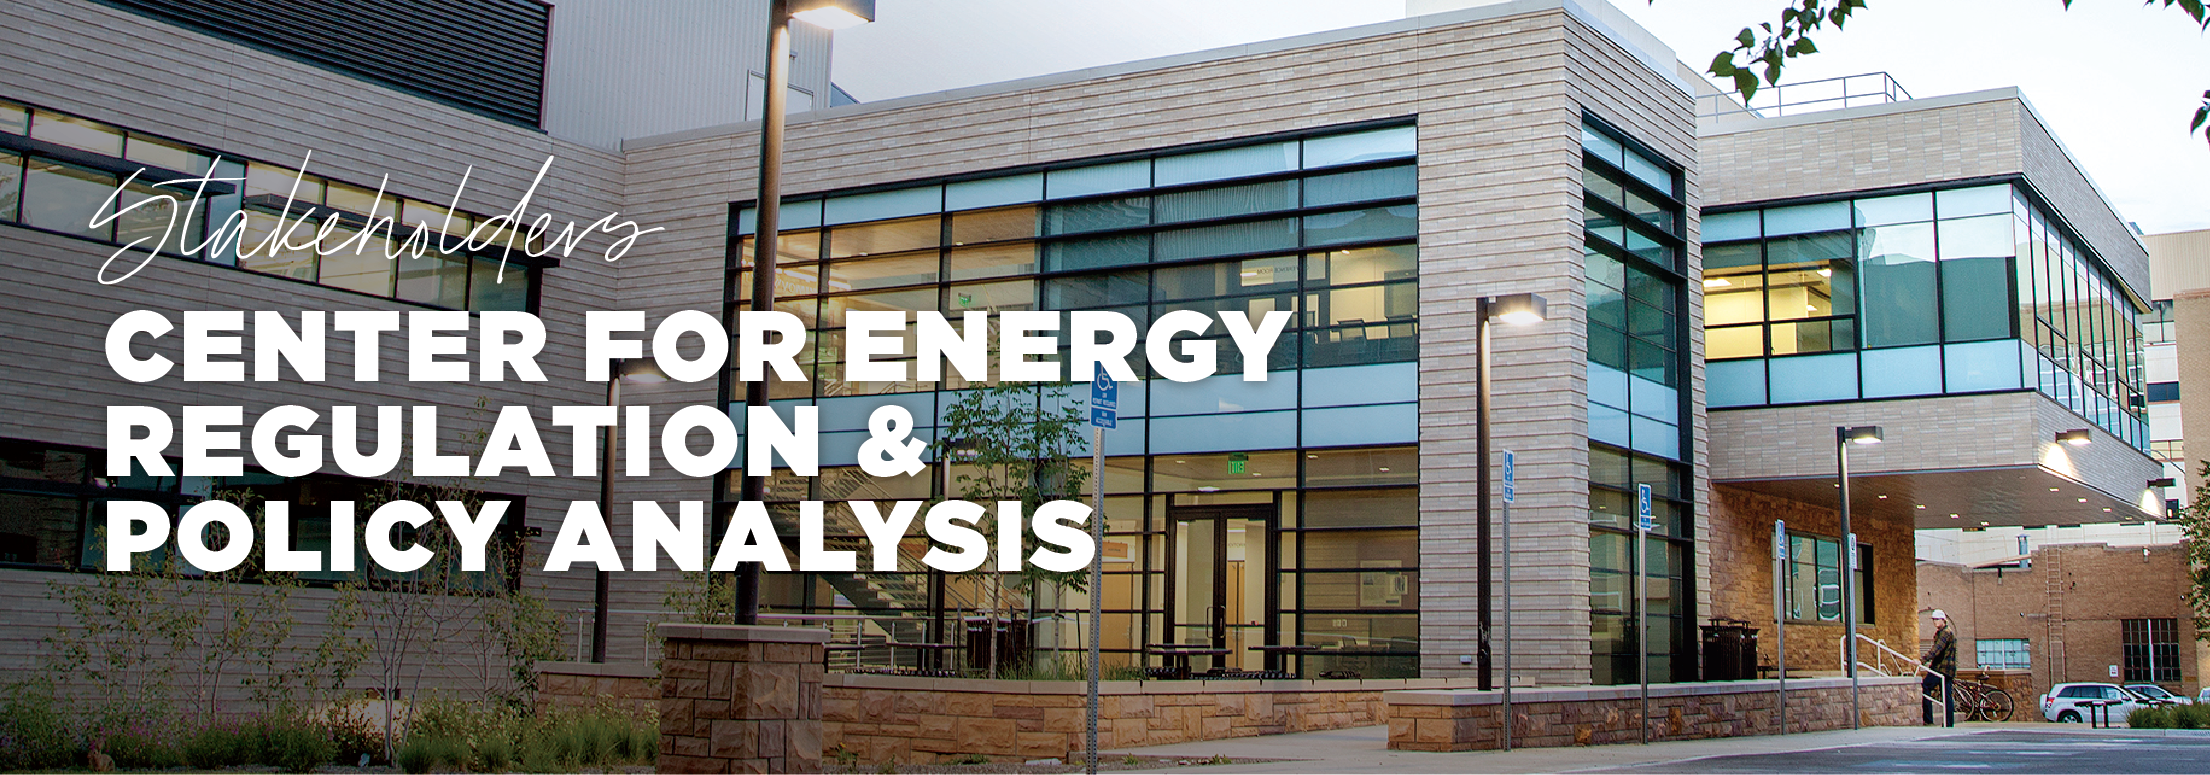 Center for Energy Regulation and Policy Analysis Stakeholders